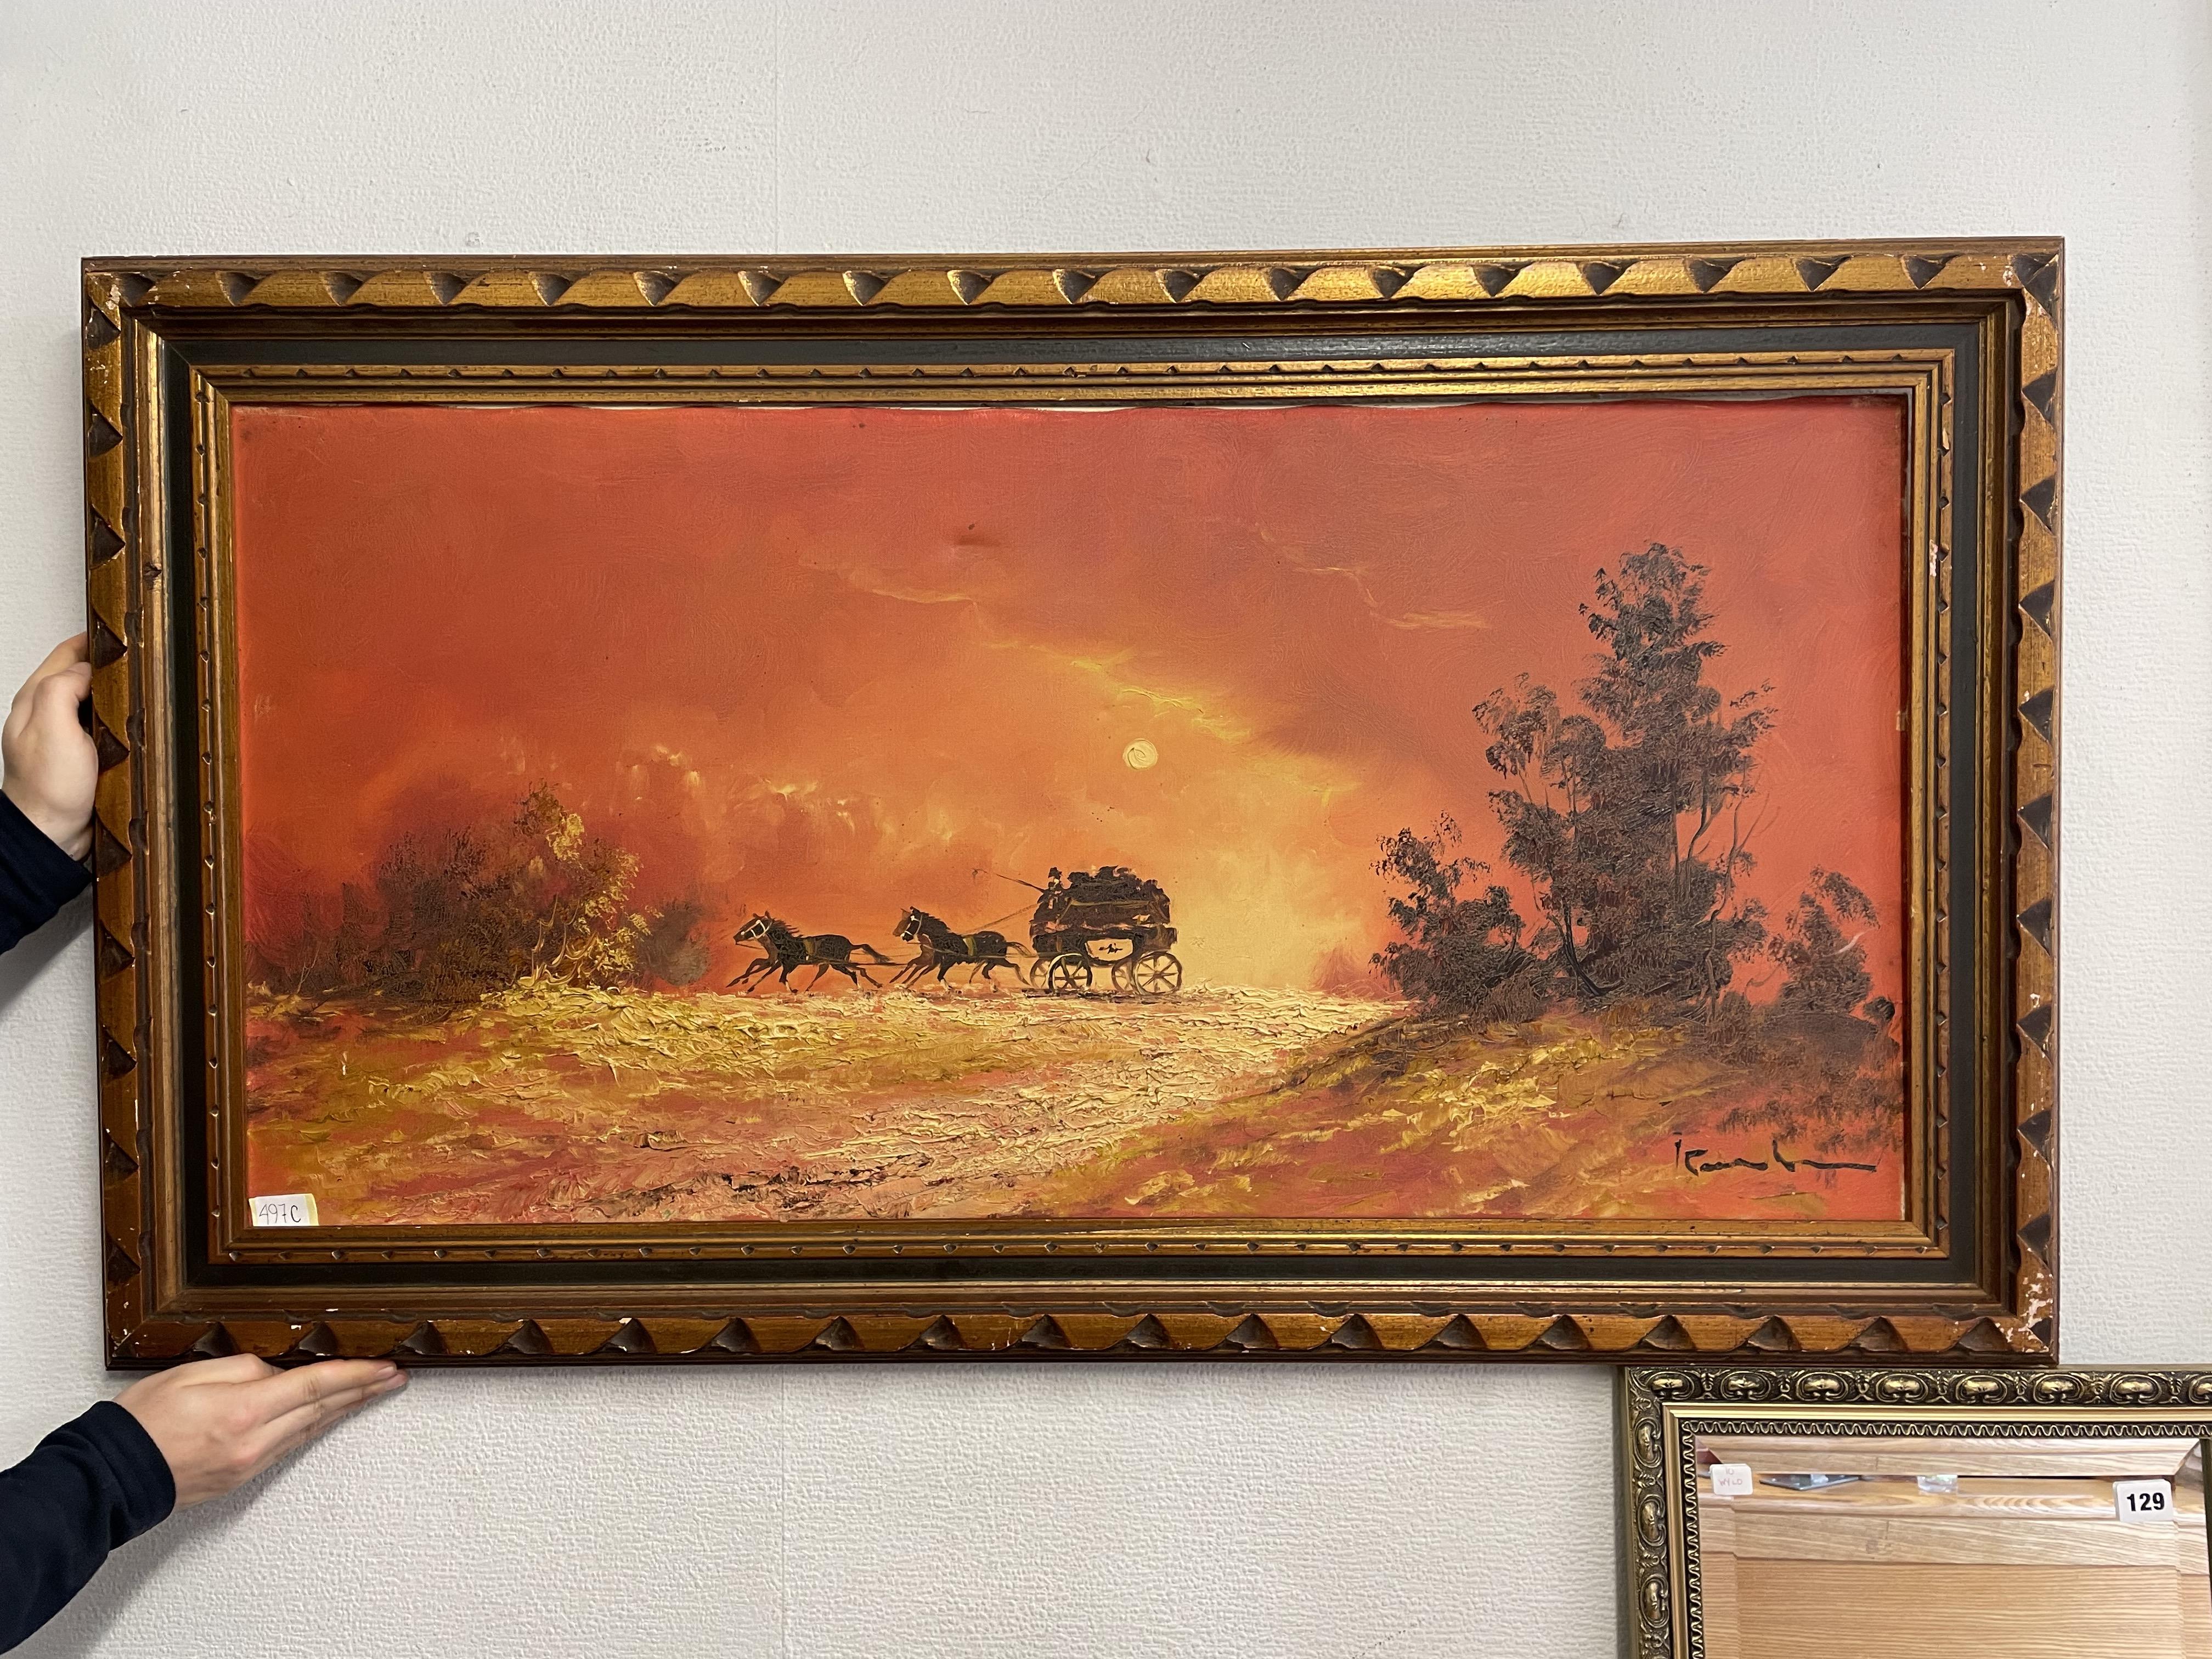 20TH CENTURY CONTINENTAL OIL ON CANVAS STAGECOACH AT SUNSET FRAMED SIGNED LOWER RIGHT INDISTINCT - Image 2 of 3